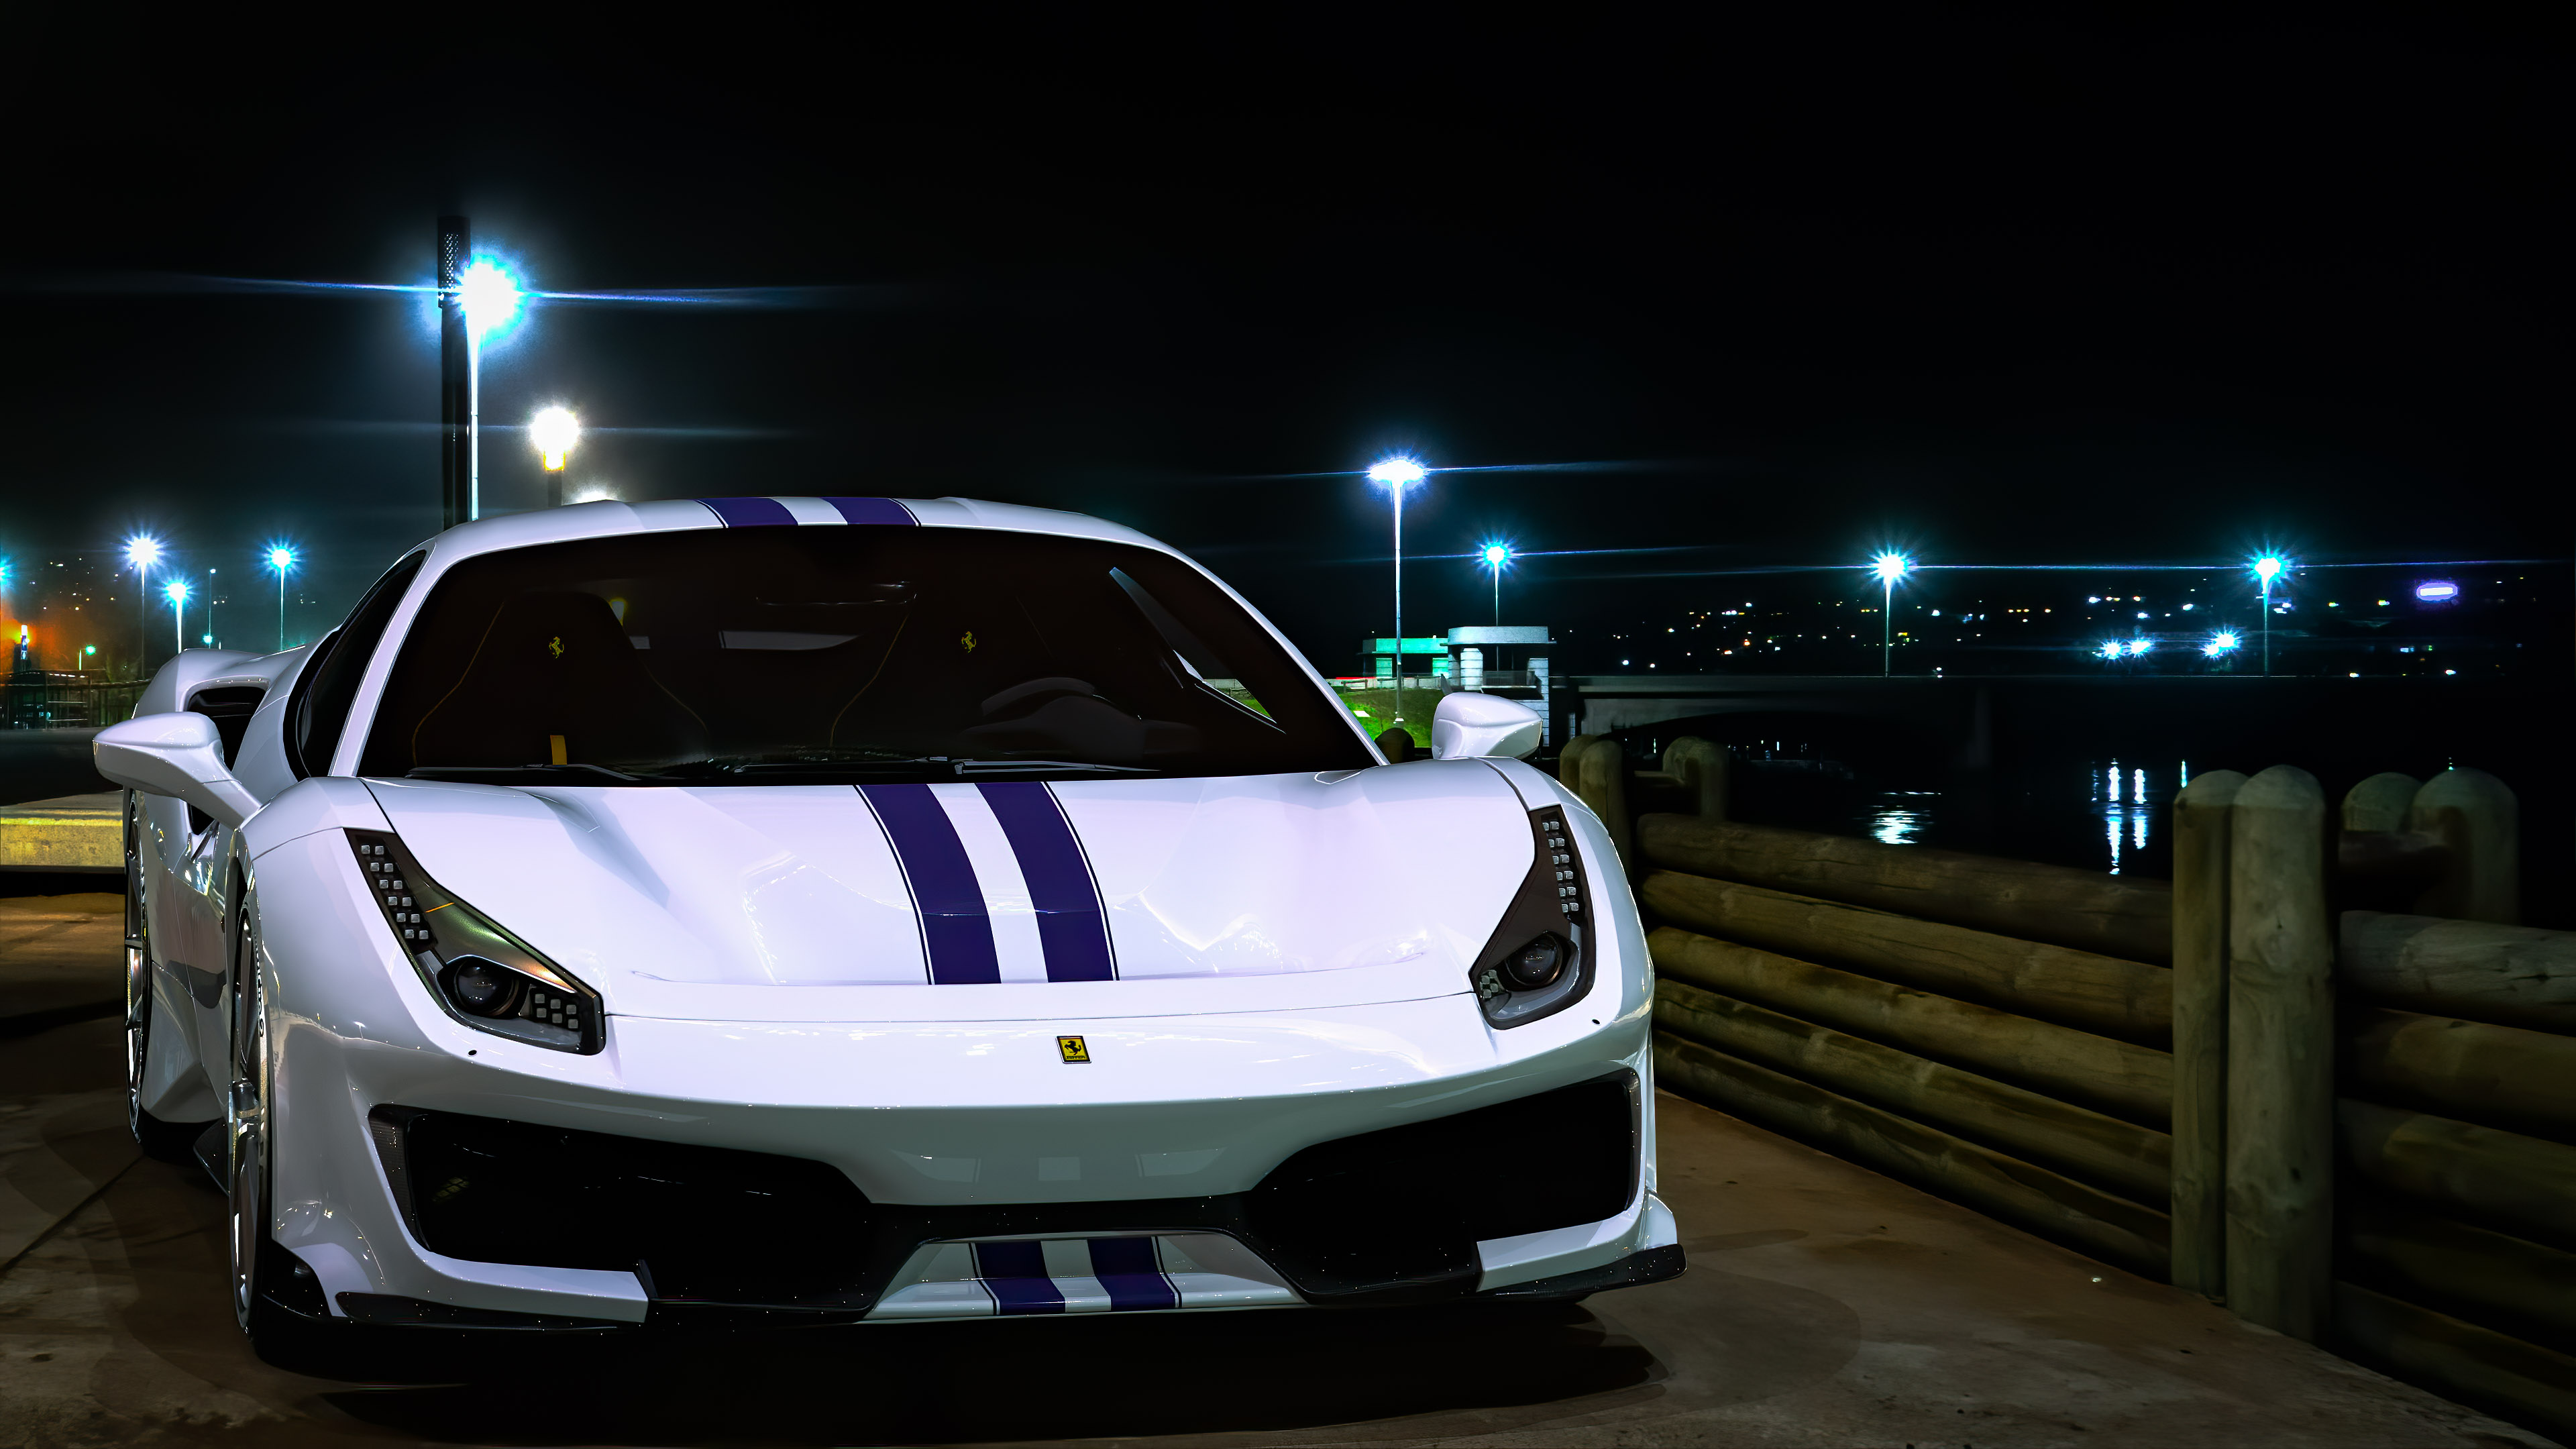 Adorn your screen with our best car wallpaper featuring the white Ferrari 488 Pista, a symbol of luxury and speed.